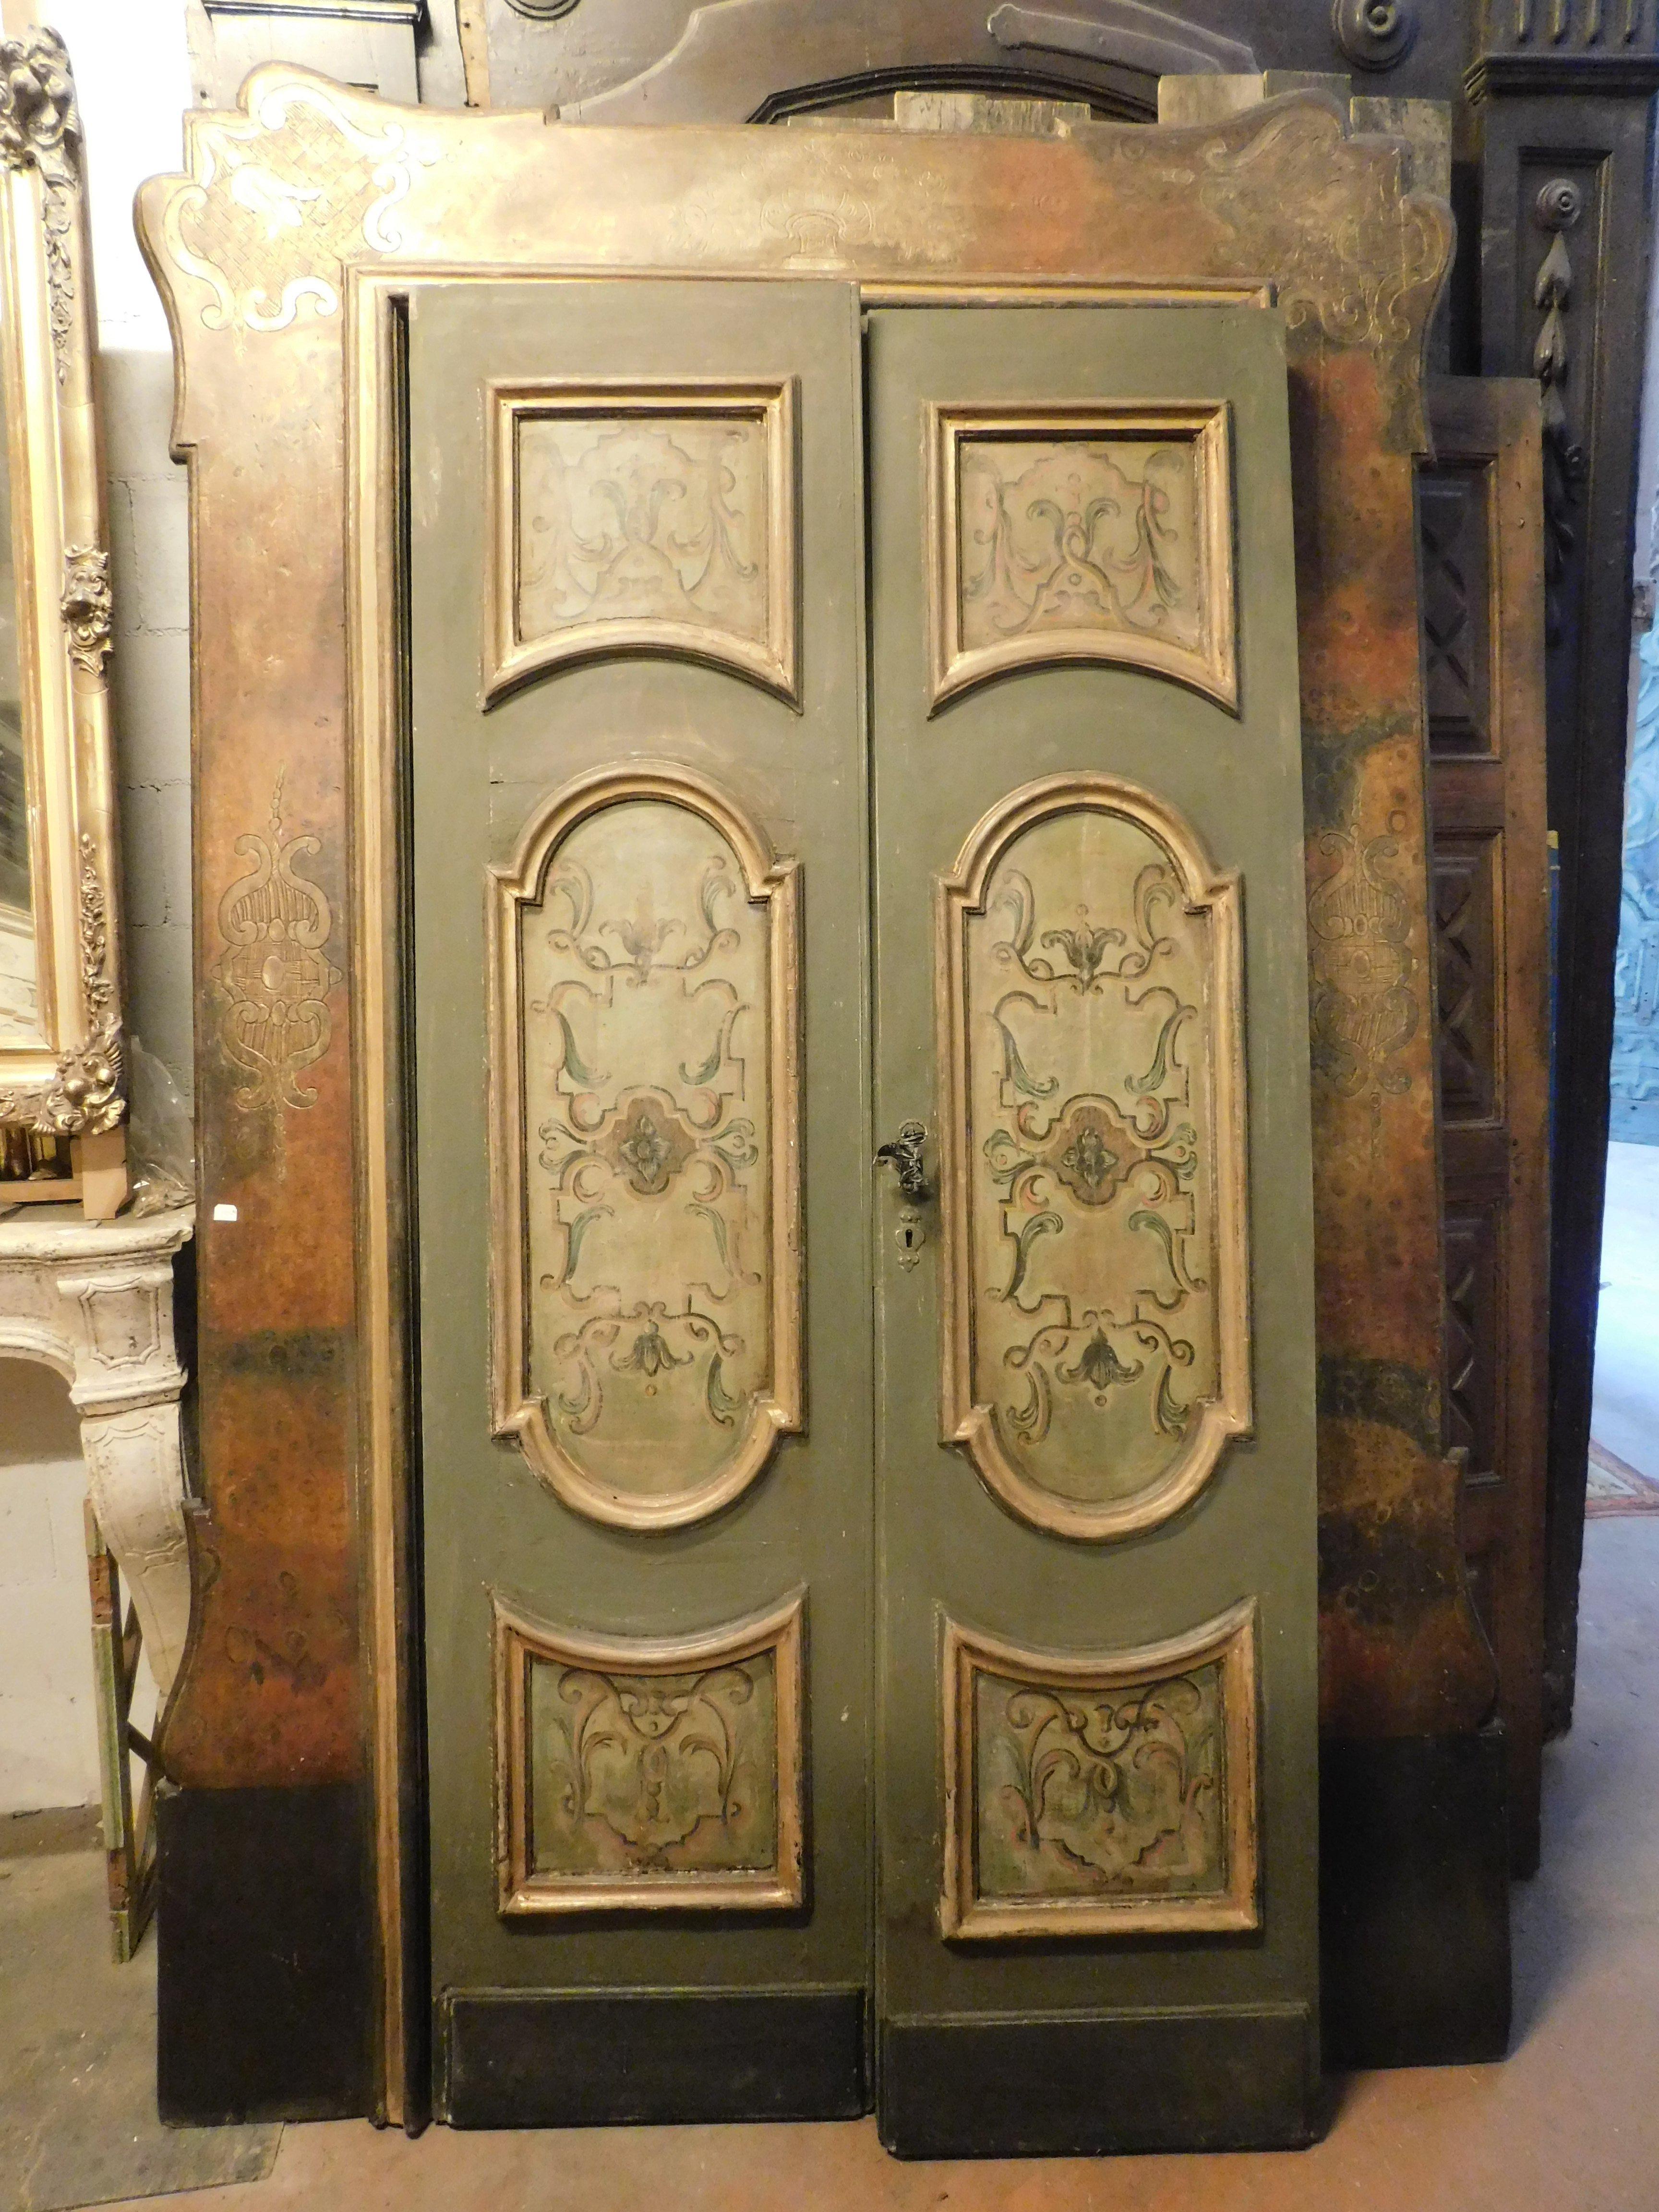 Carved Two-Leaf Lacquered Wooden Door Complete with Frame, from 18th Century Italy